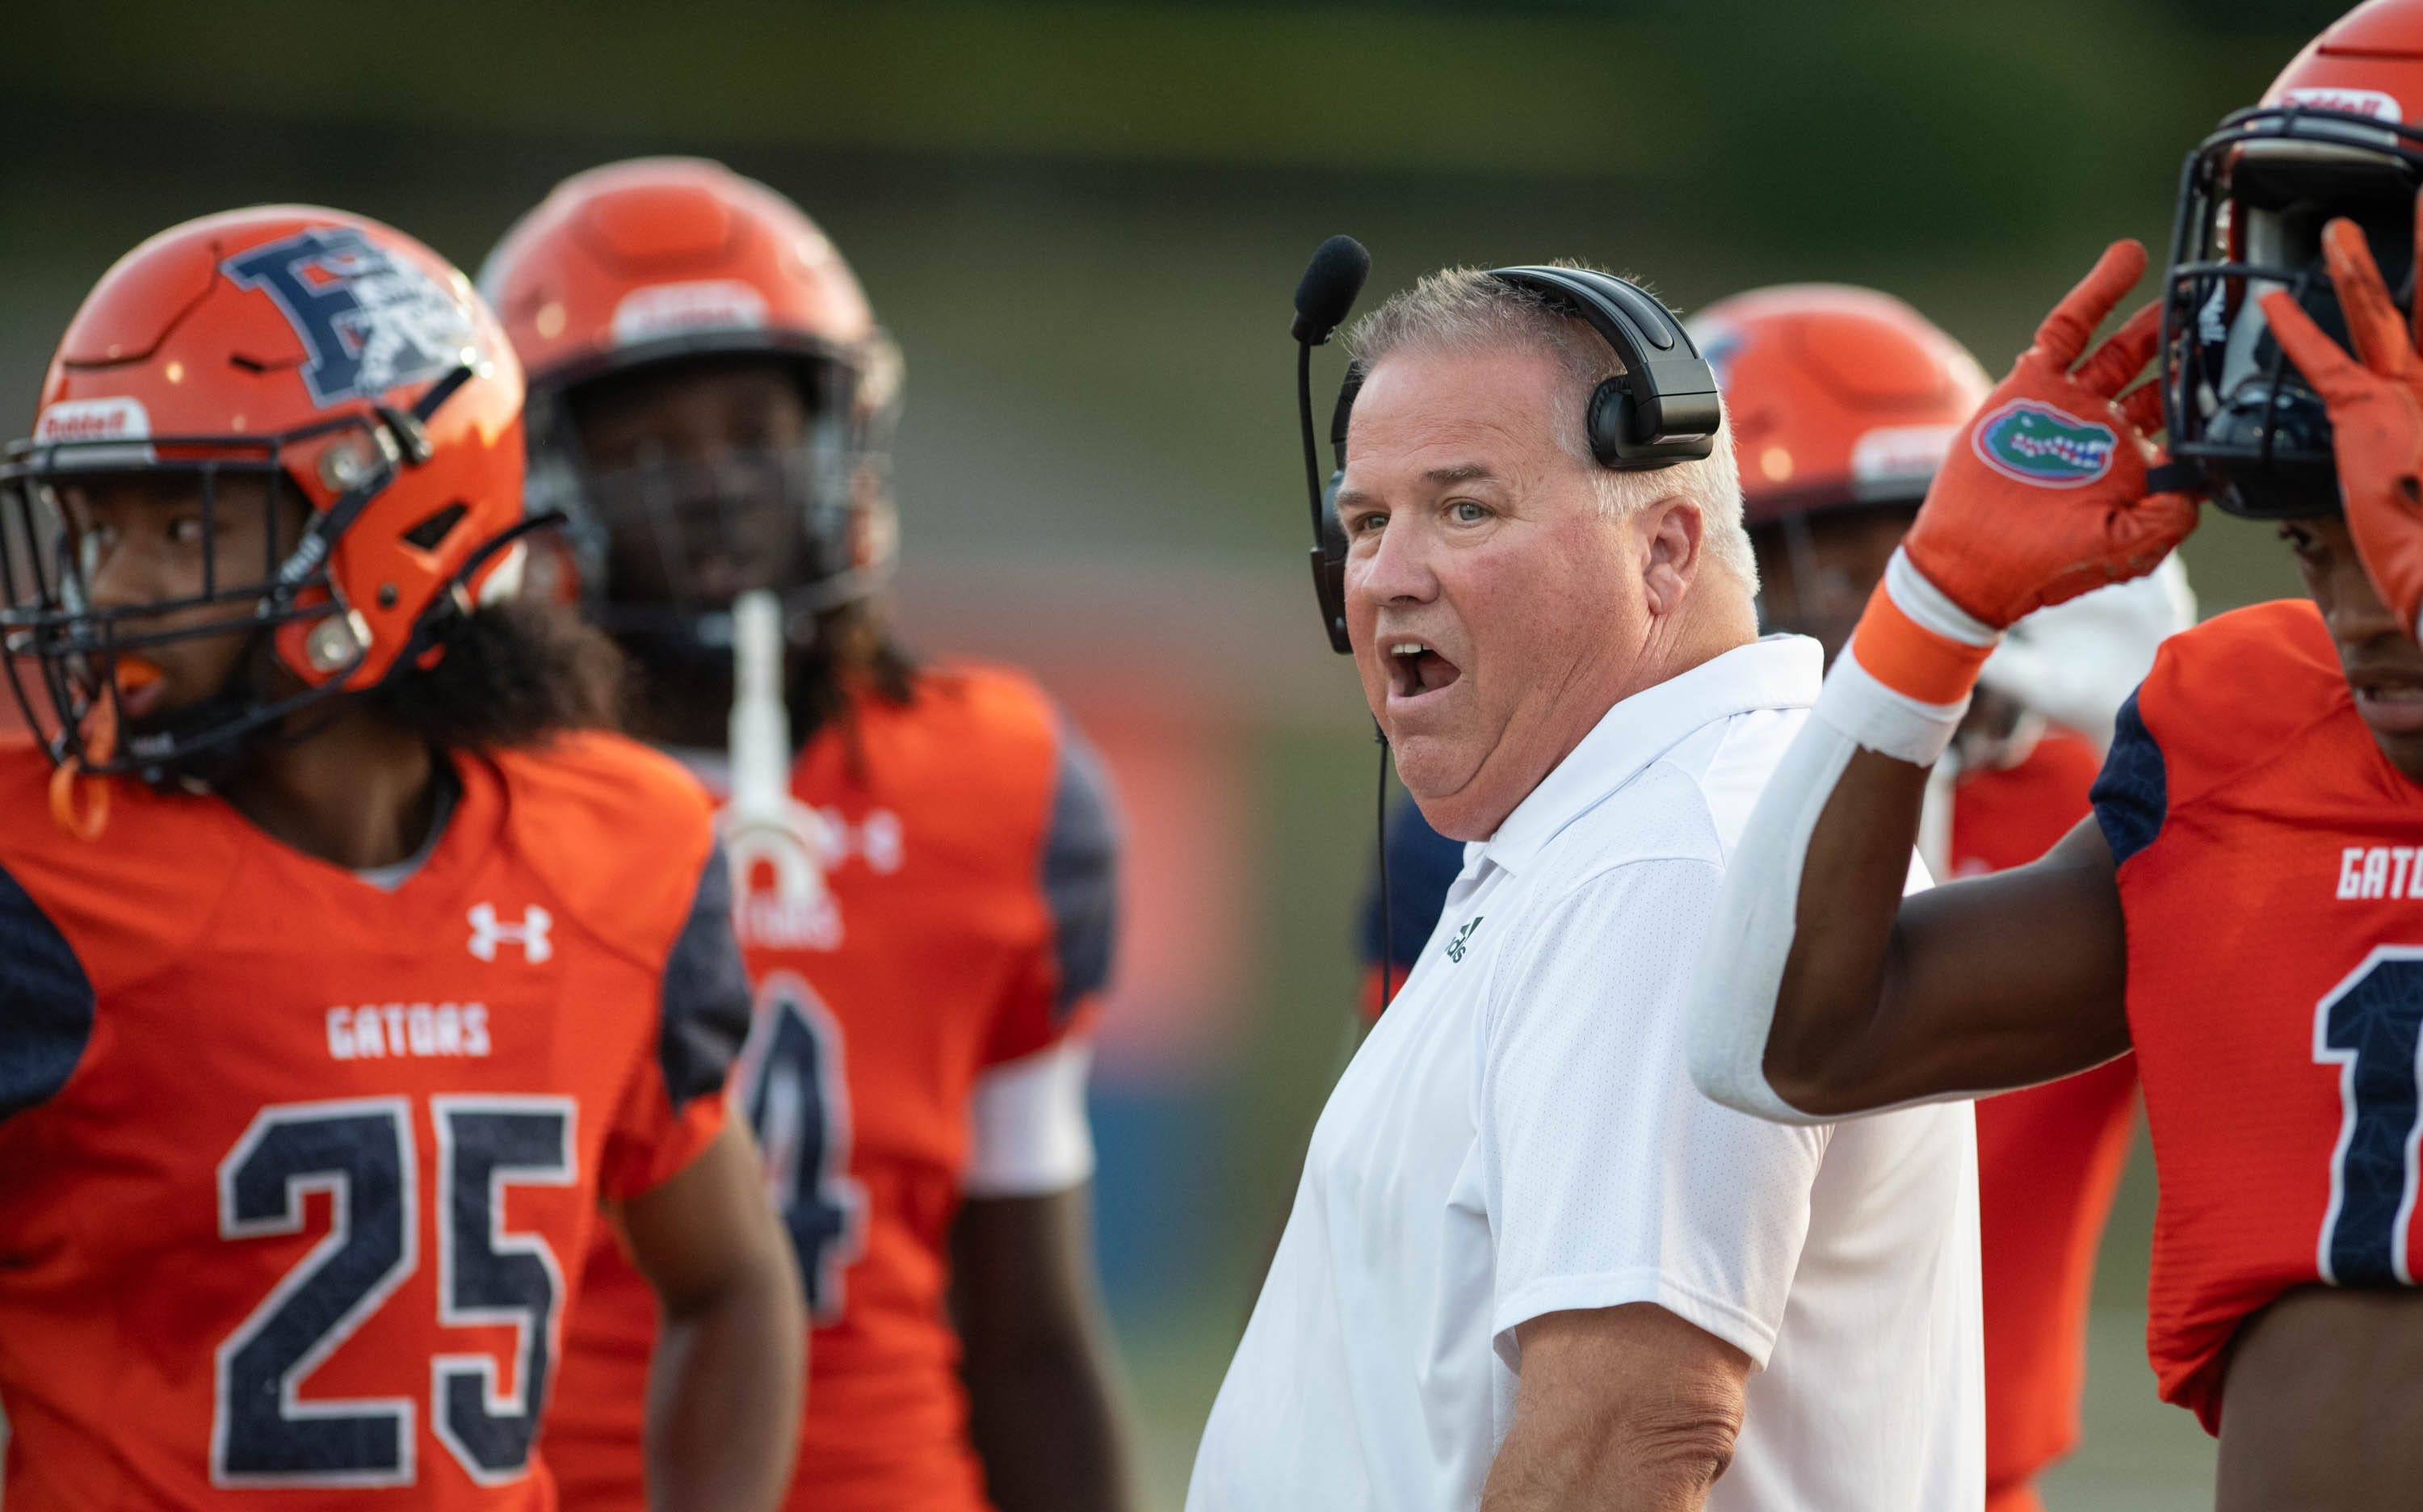 WATCH: Highlights from Escambia’s opening-night victory over West Florida